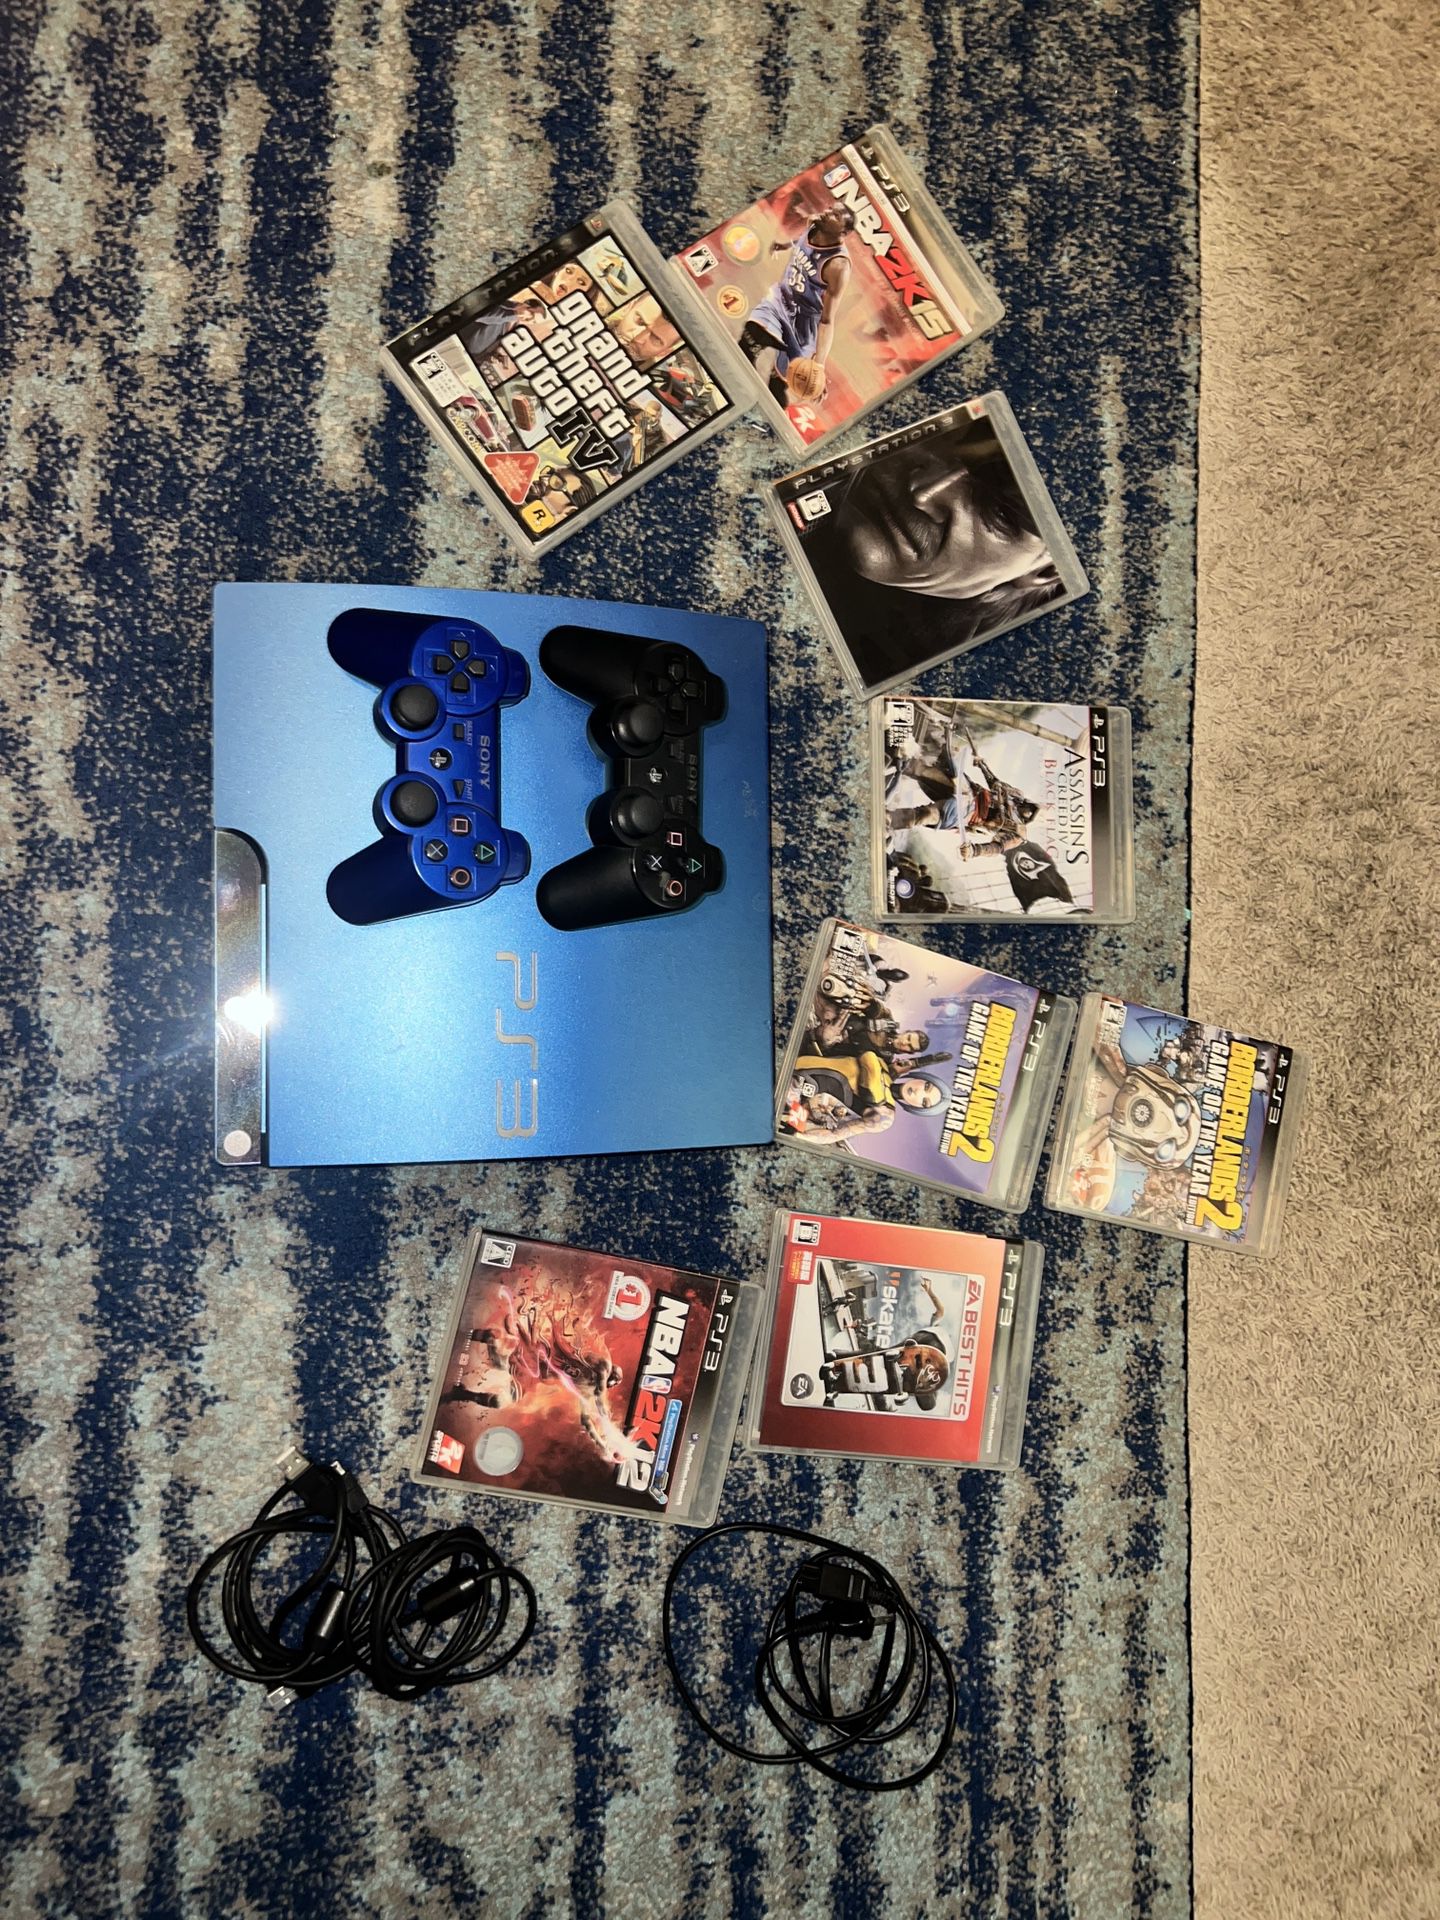 PS3 Blue with two controllers and 8 games